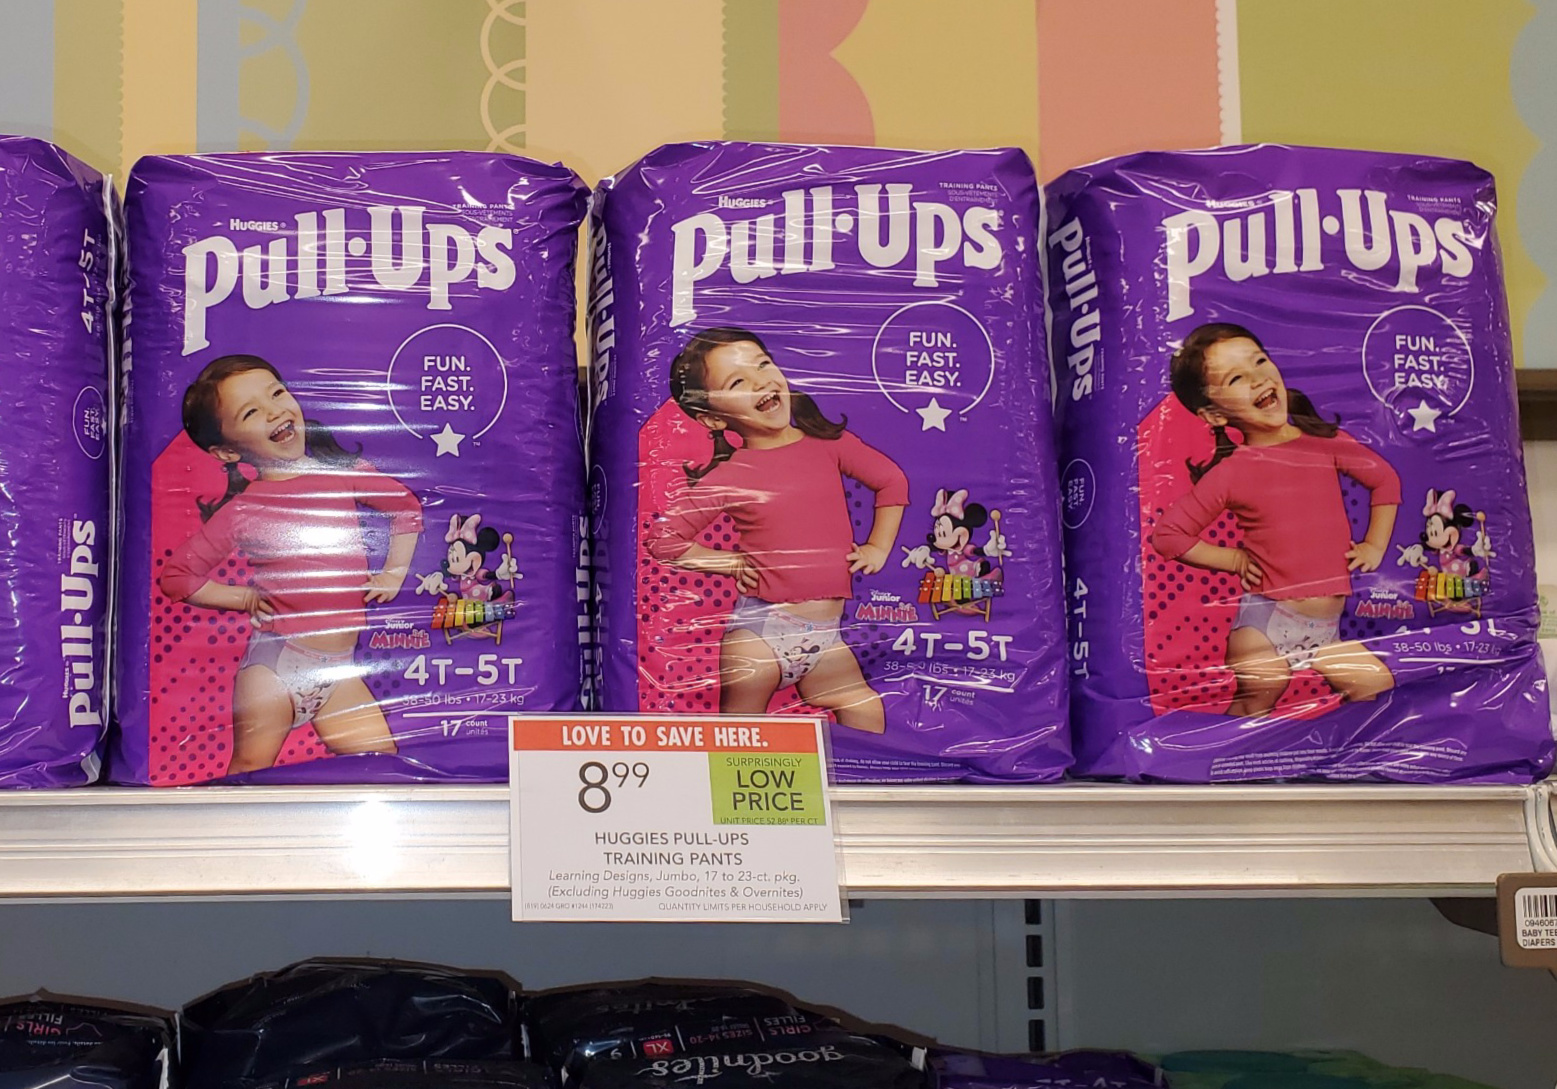 Grab A Fantastic Deal On Pull-Ups - Packs As Low As $5.99 At Publix on I Heart Publix